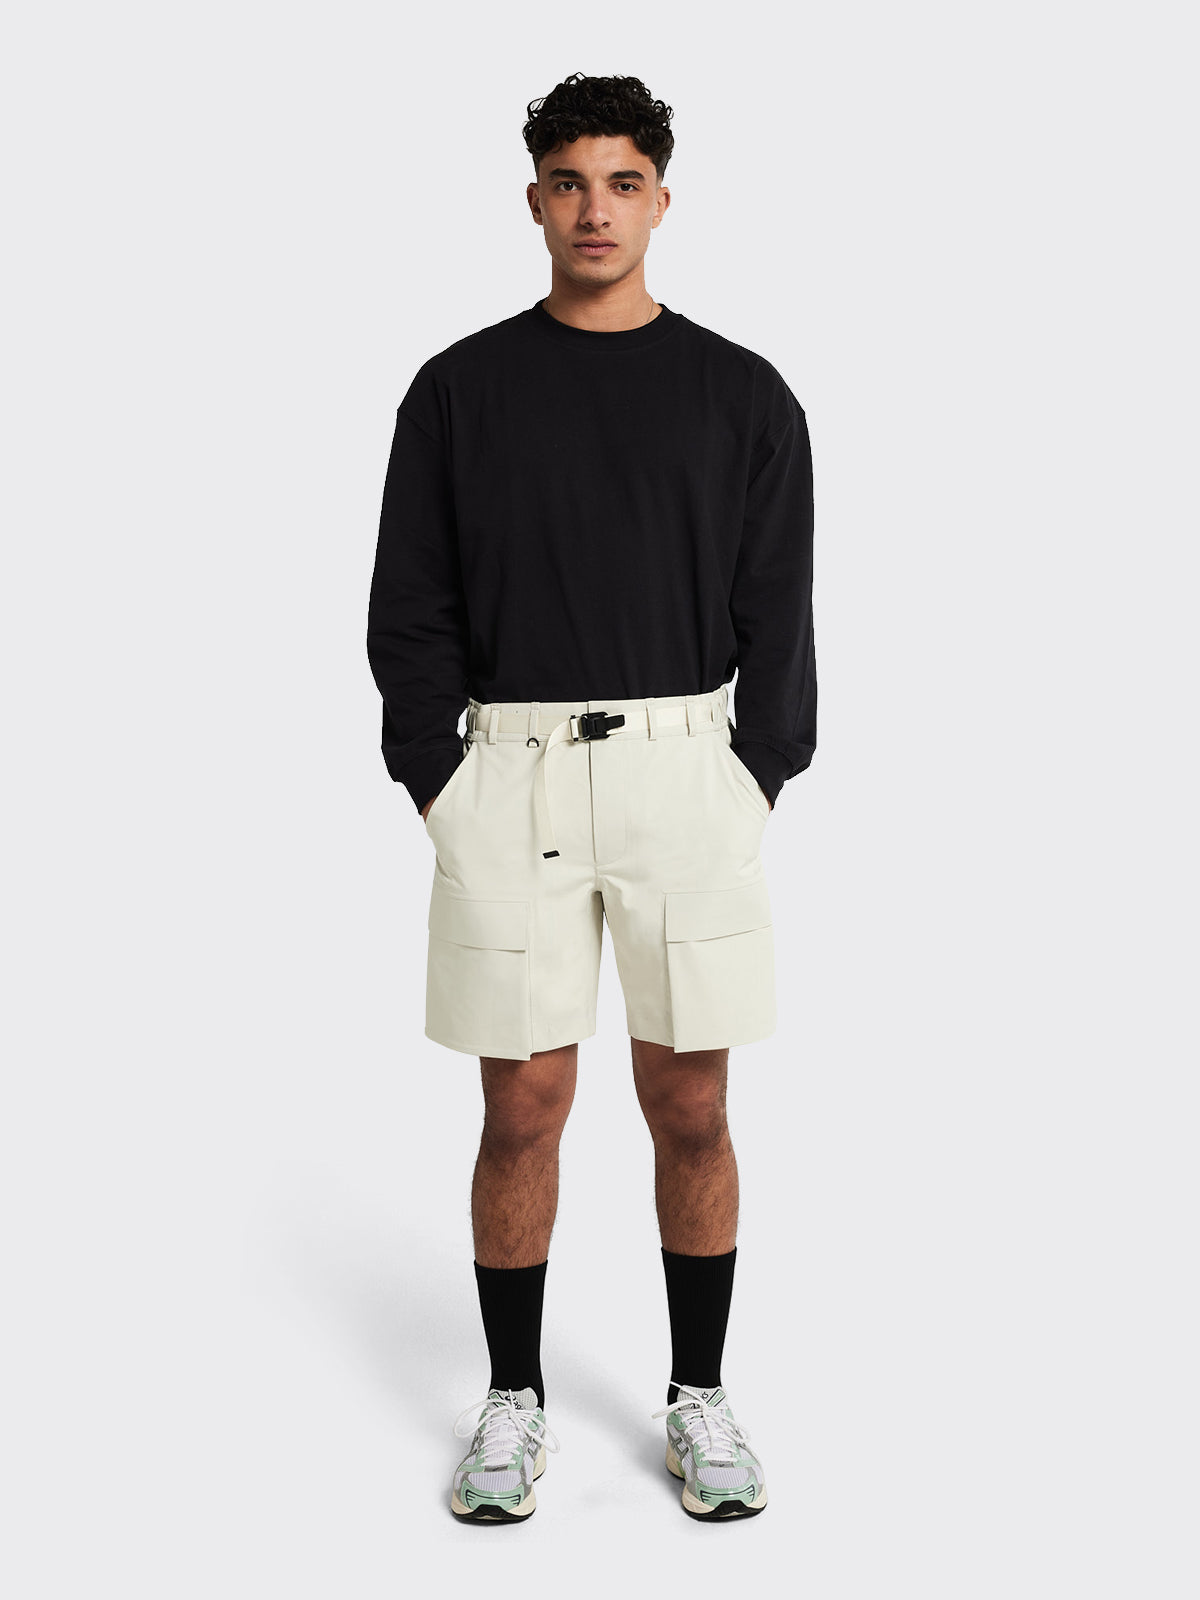 Man wearing Giske shorts by Blæst in the color Birch